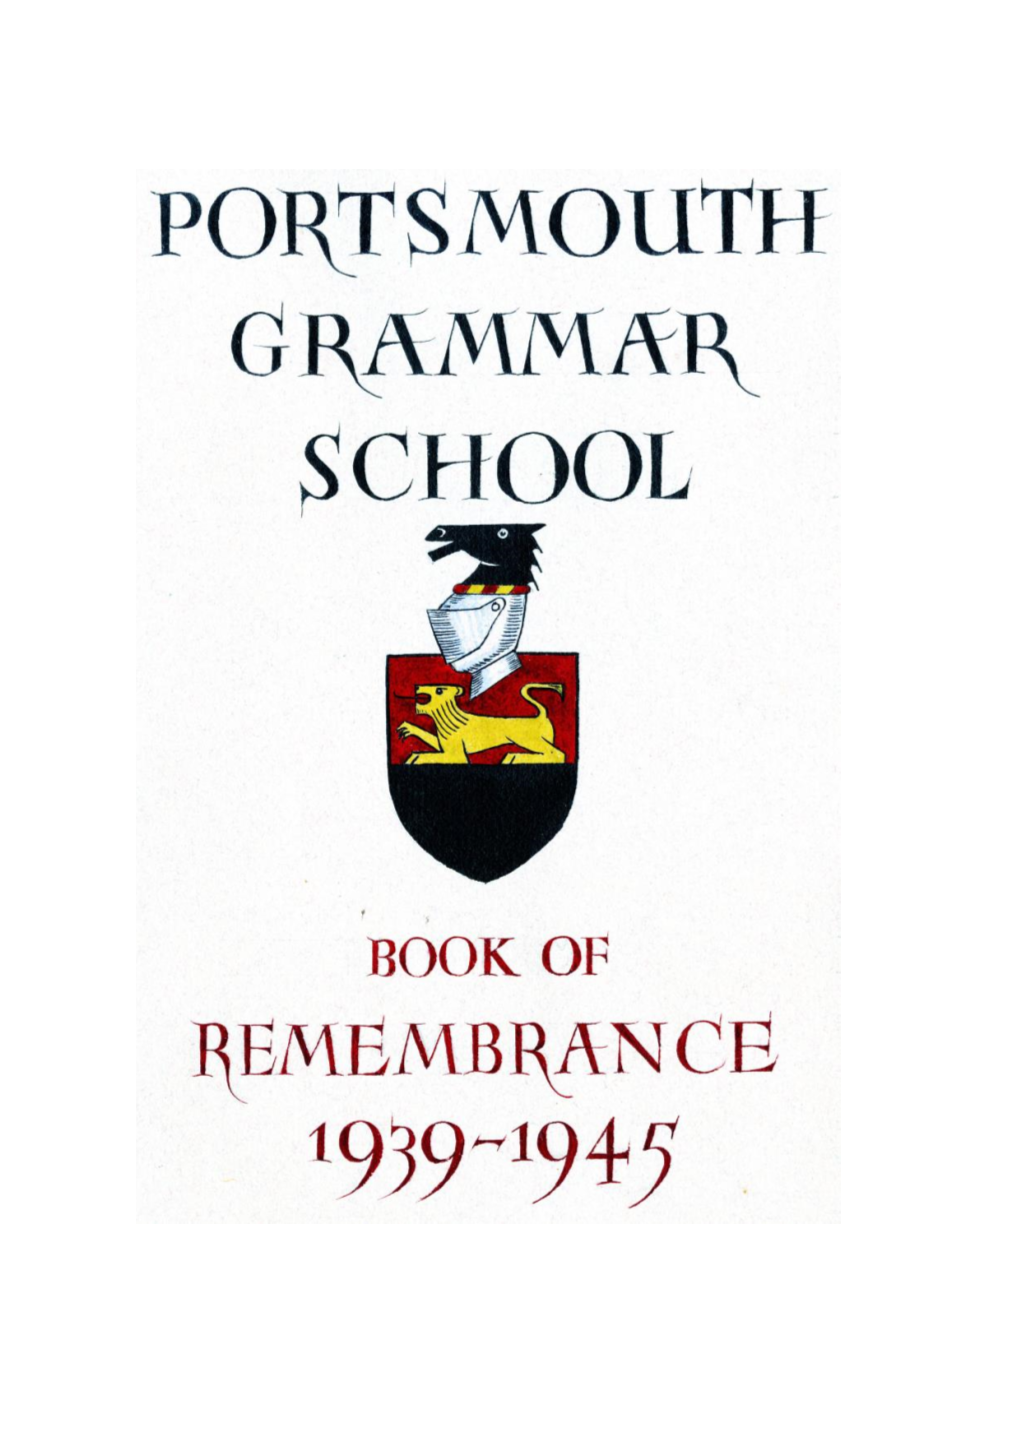 The Book of Remembrance Is Also Available to View by Clicking Here